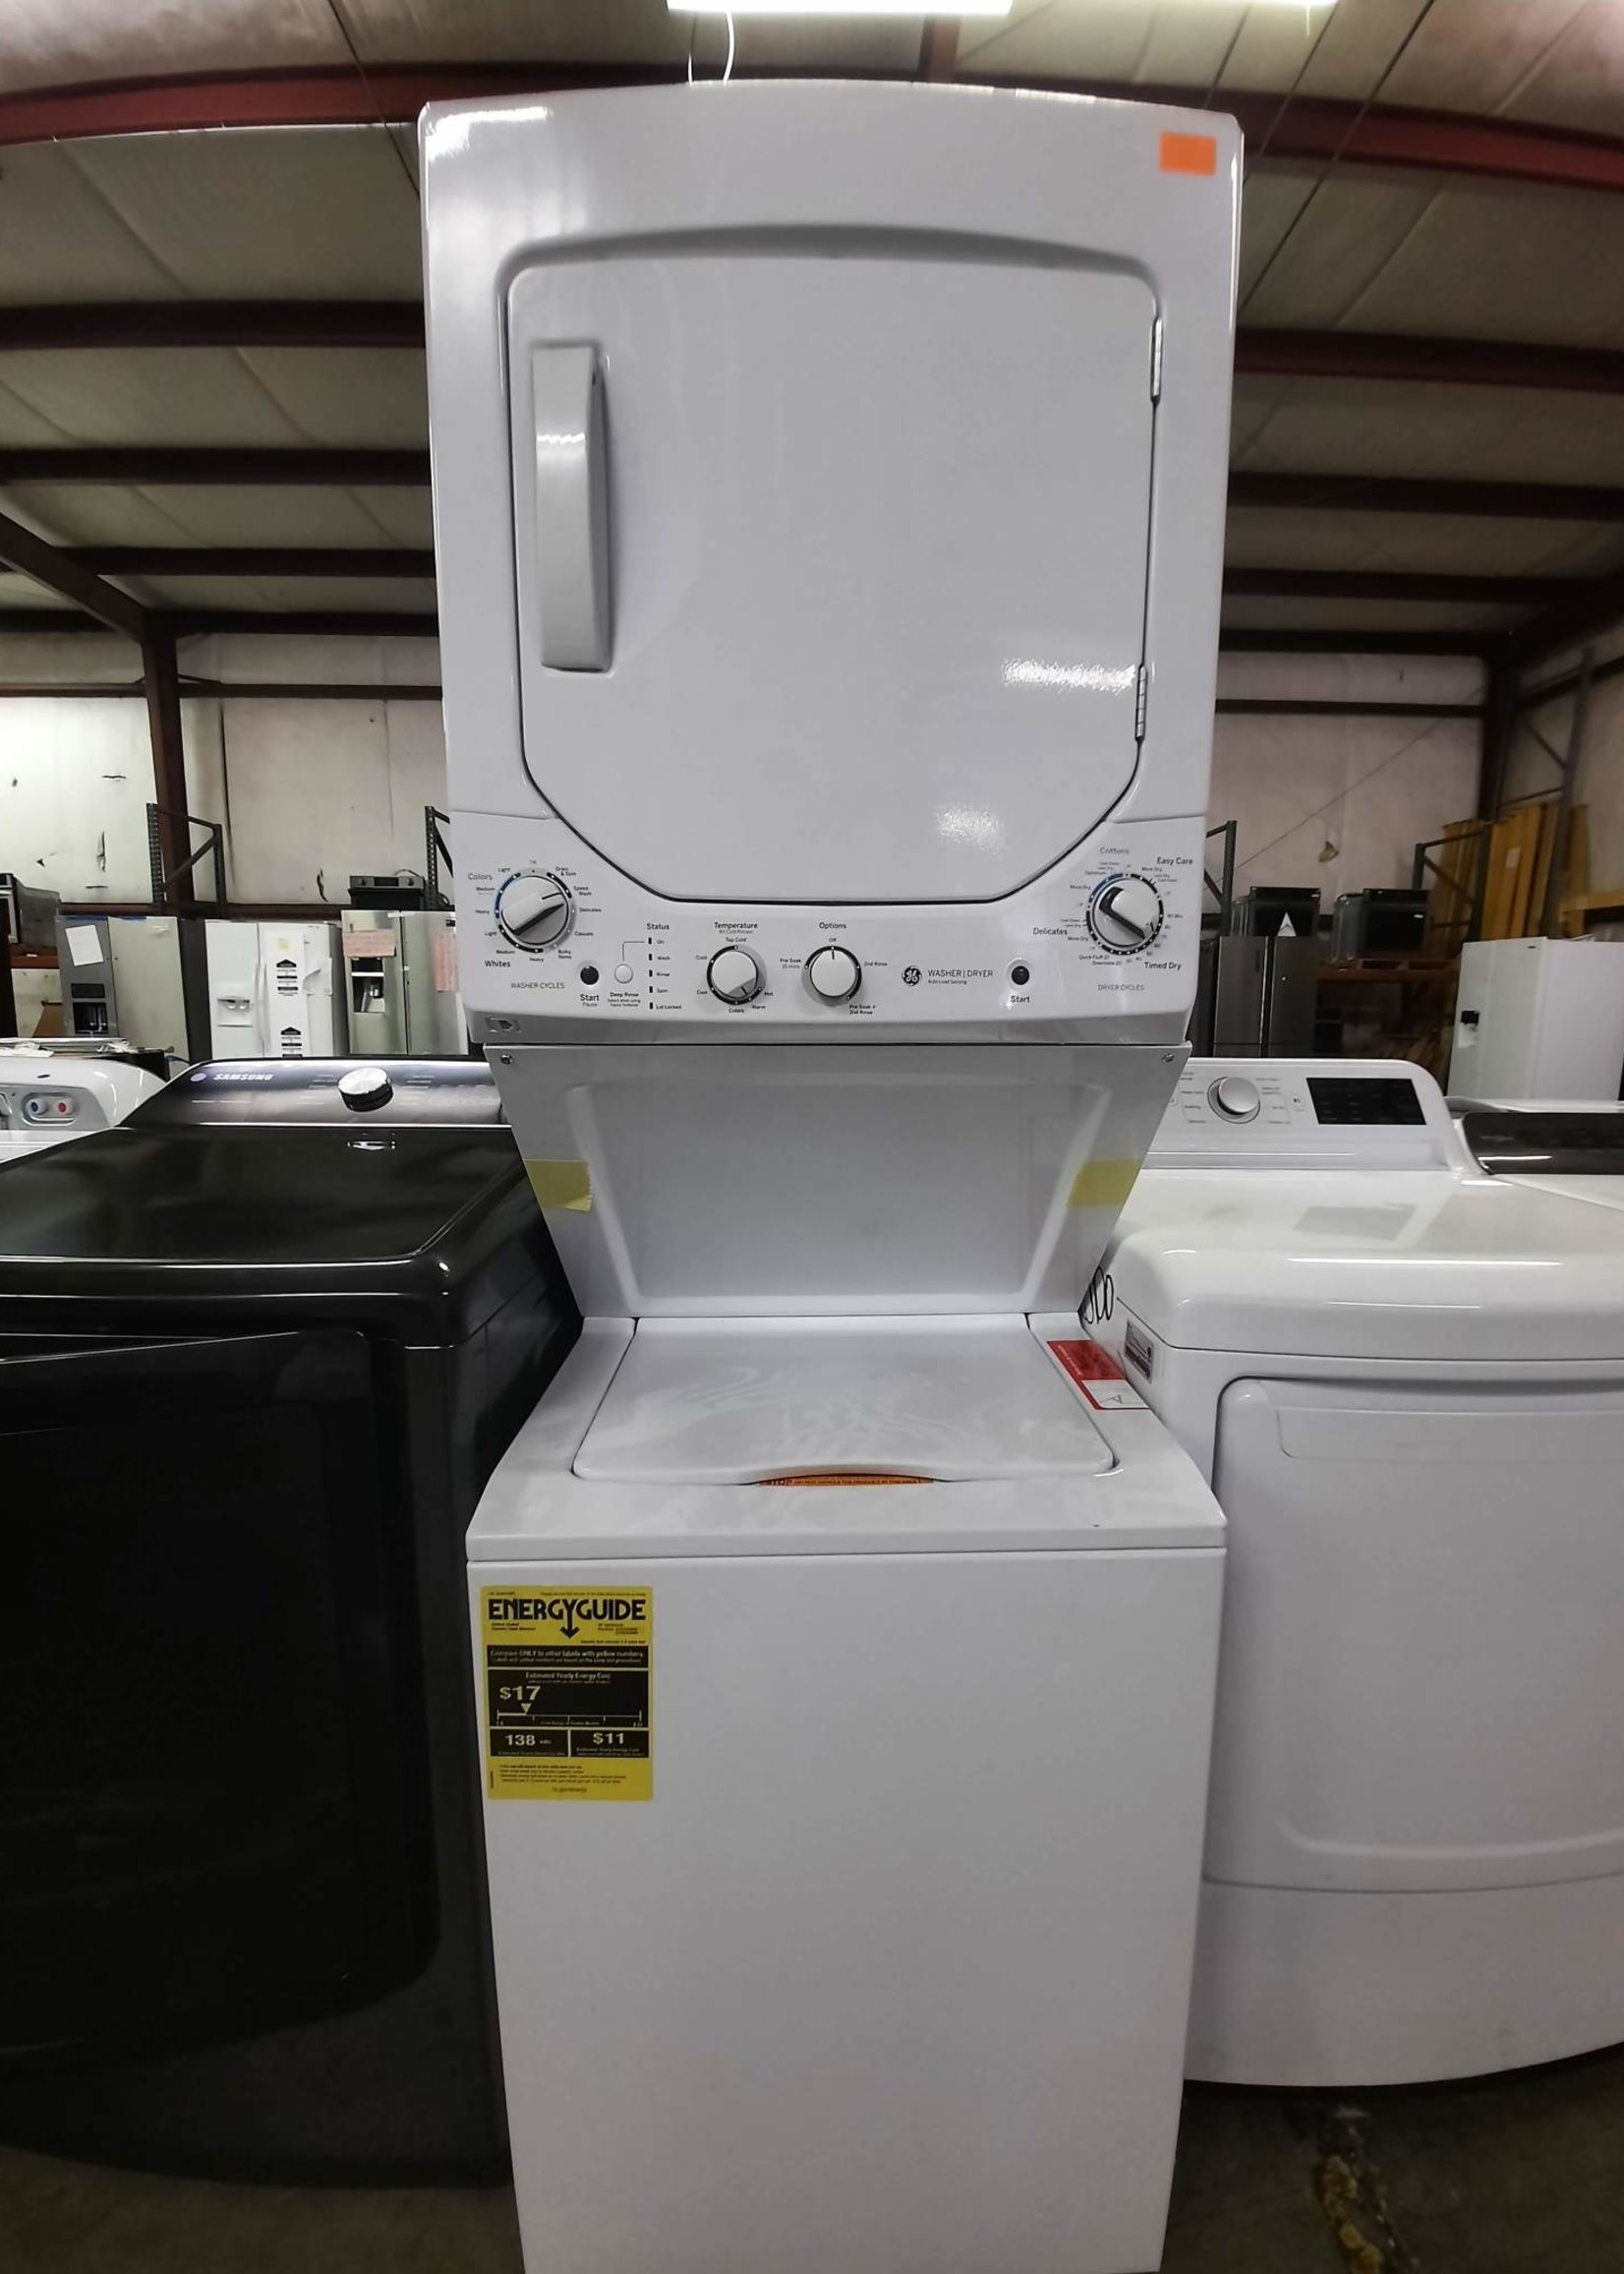 GE *GE GUD24ESSMWW  24 Inch White Laundry Center with 2.3 cu. ft. Washer and 4.4 cu. ft. 240-Volt Vented Electric Dryer